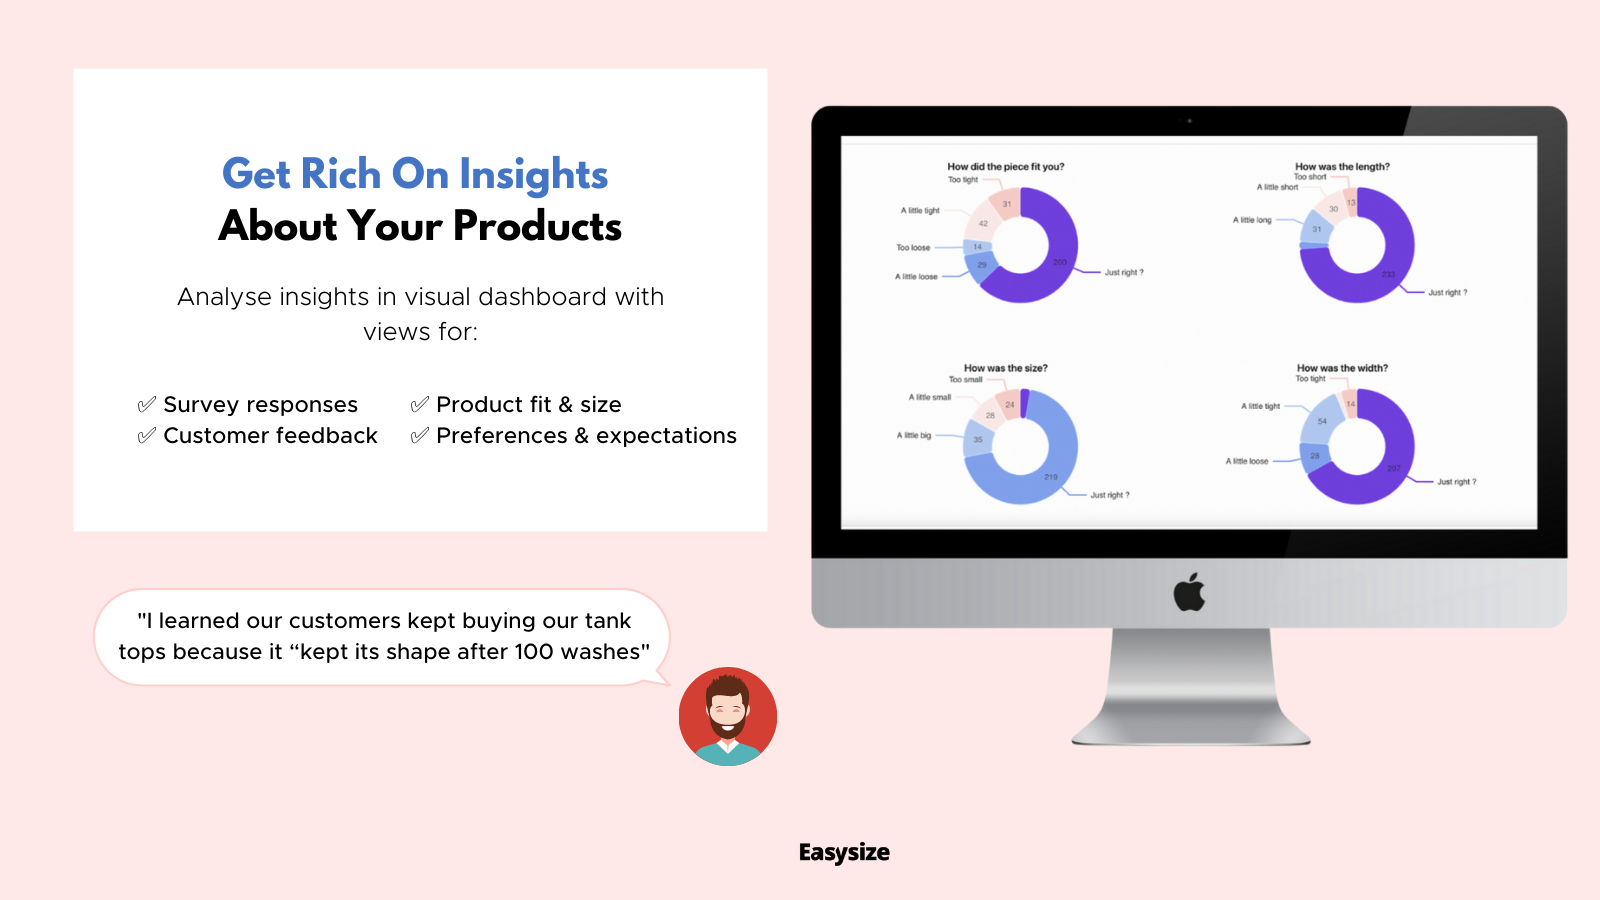 Get rich on insights about your products